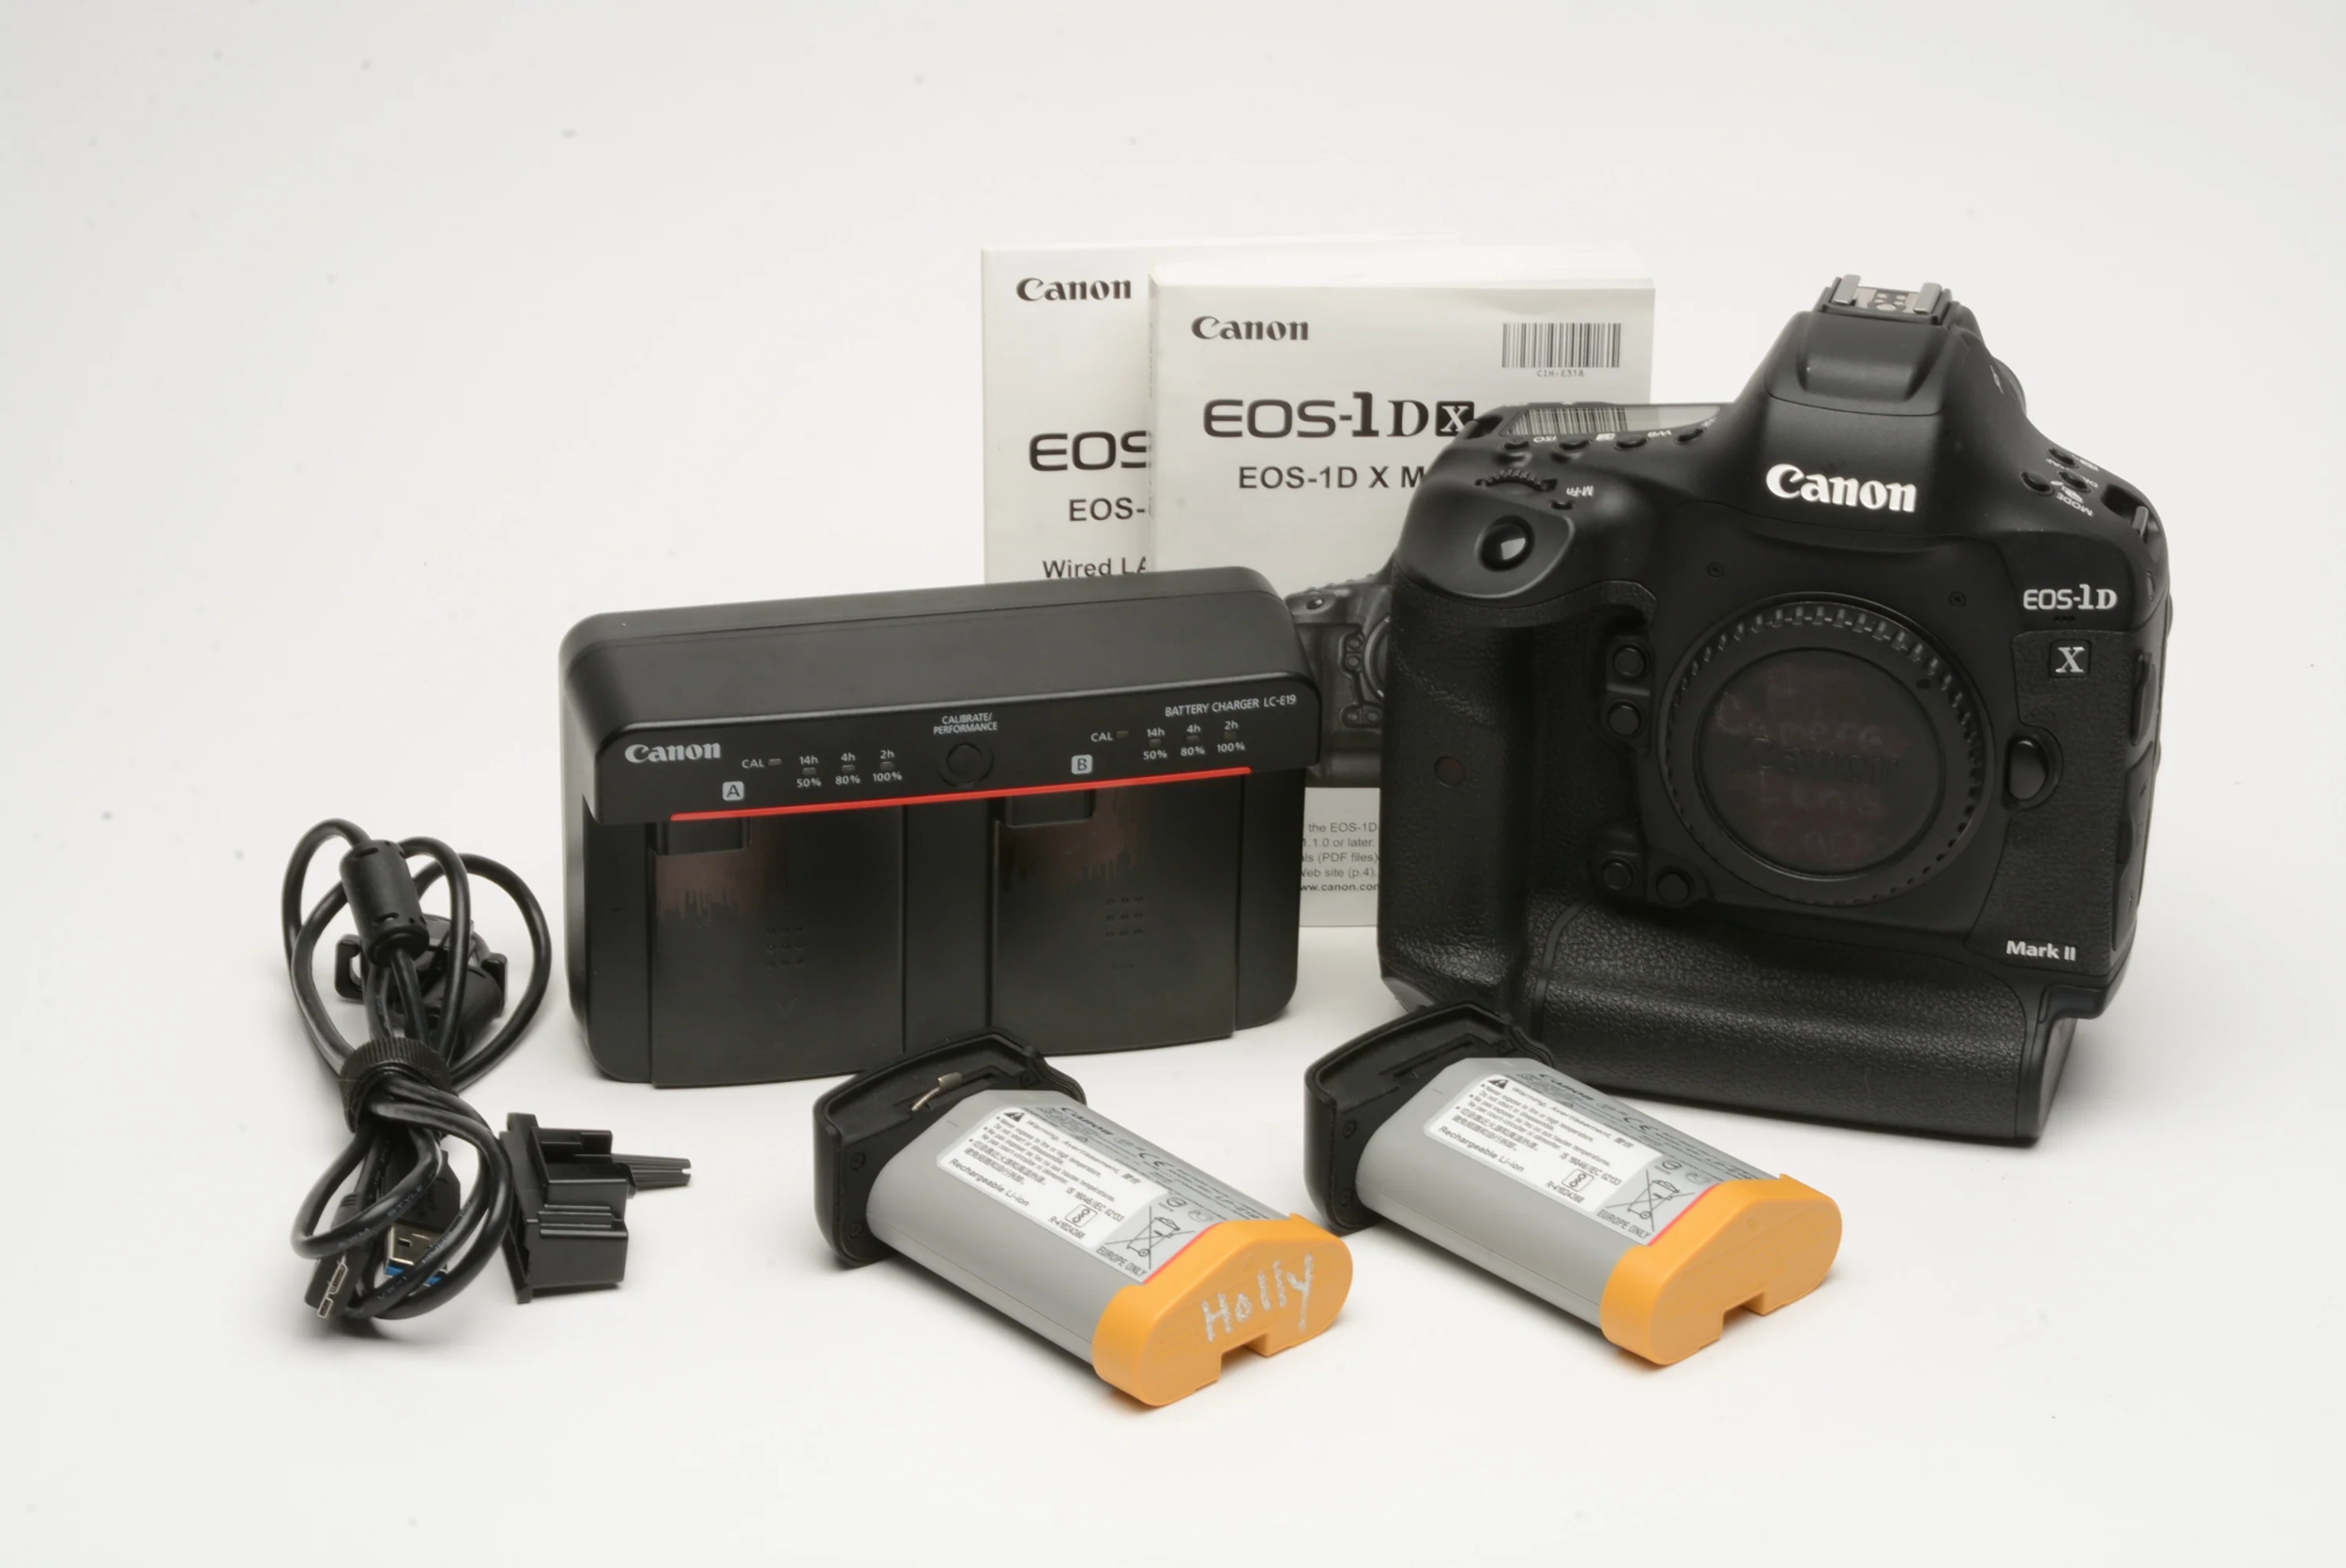 Canon EOS 1DX Mark II Body, 2 batts, charger, manual, ONLY 2201 